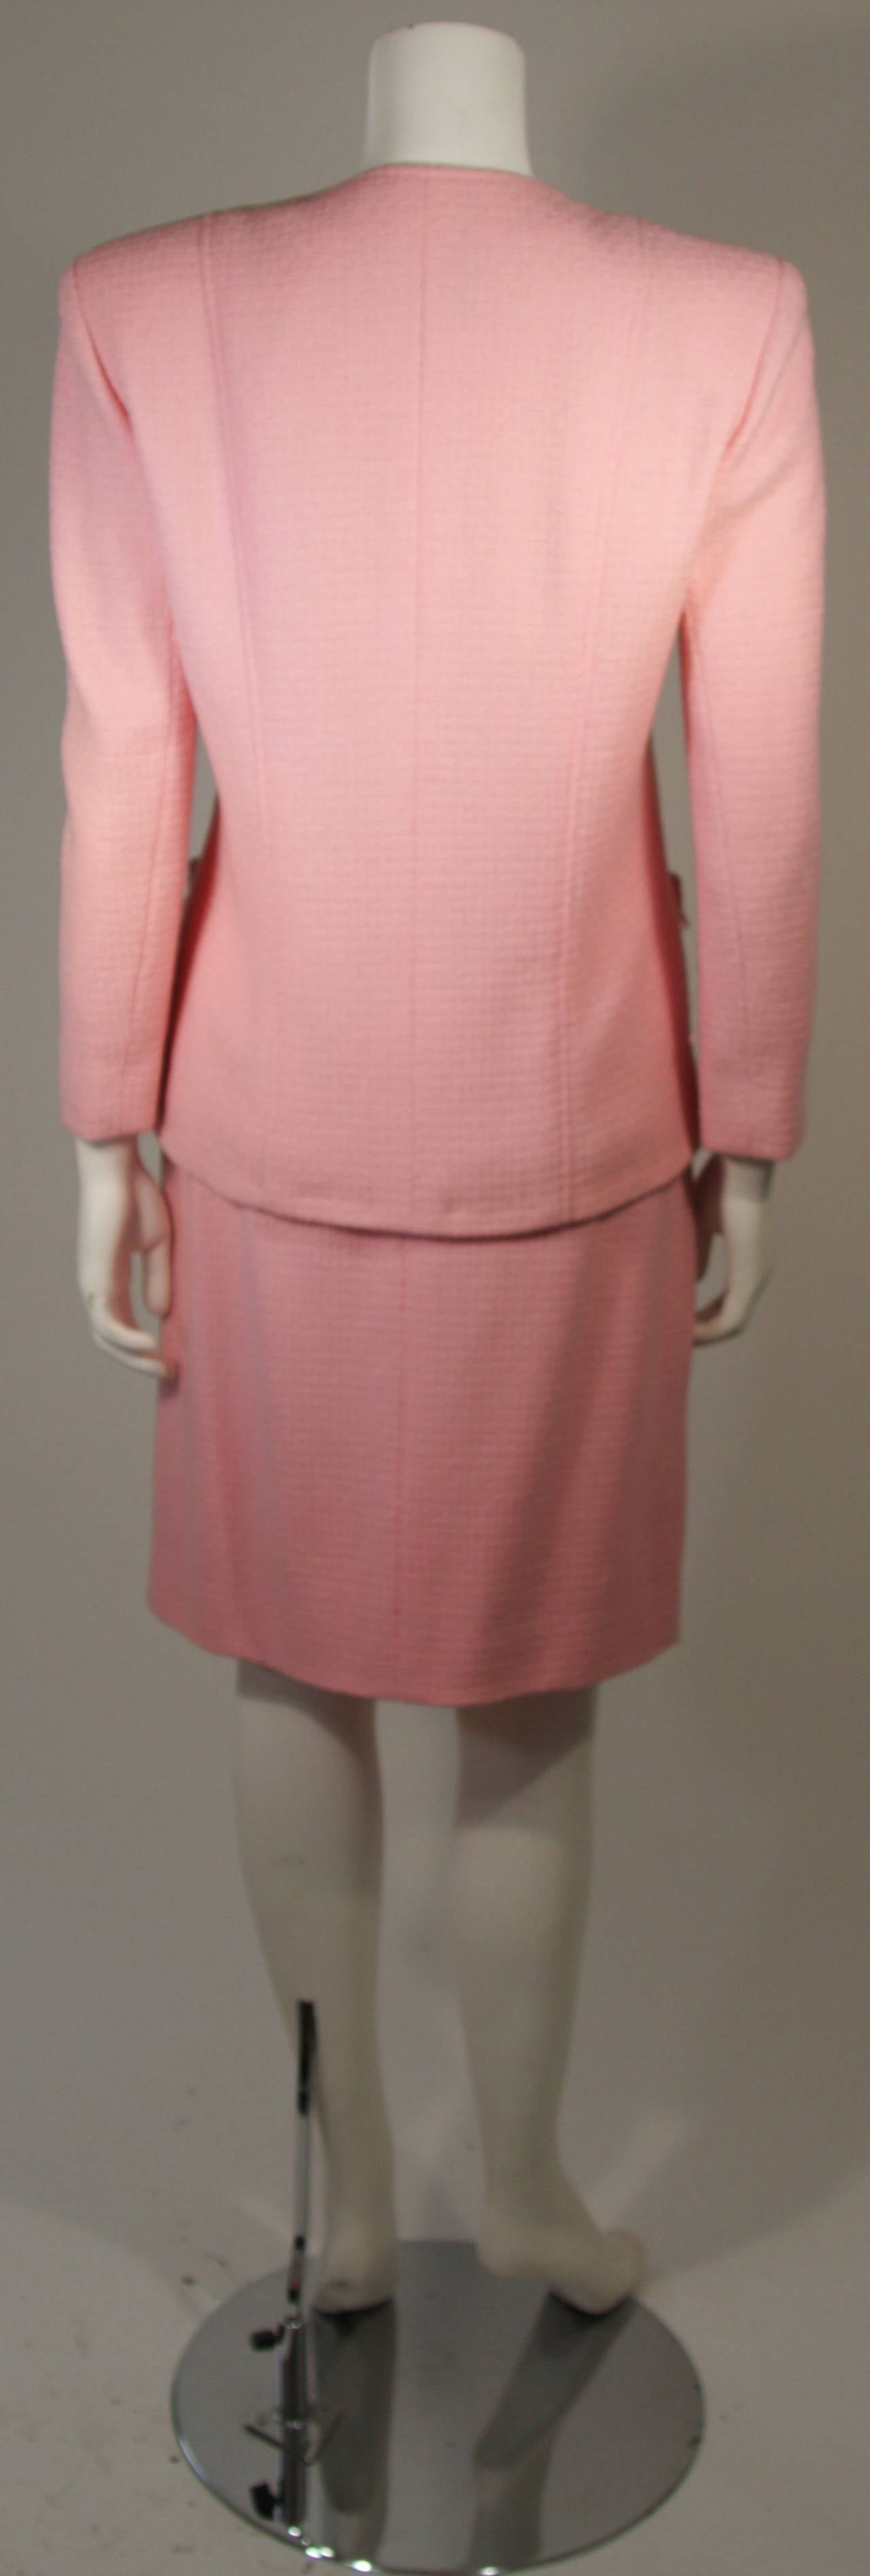 Women's Chanel Pink Boucle Wool Suit with Four Leaf Clover Buttons Size 6